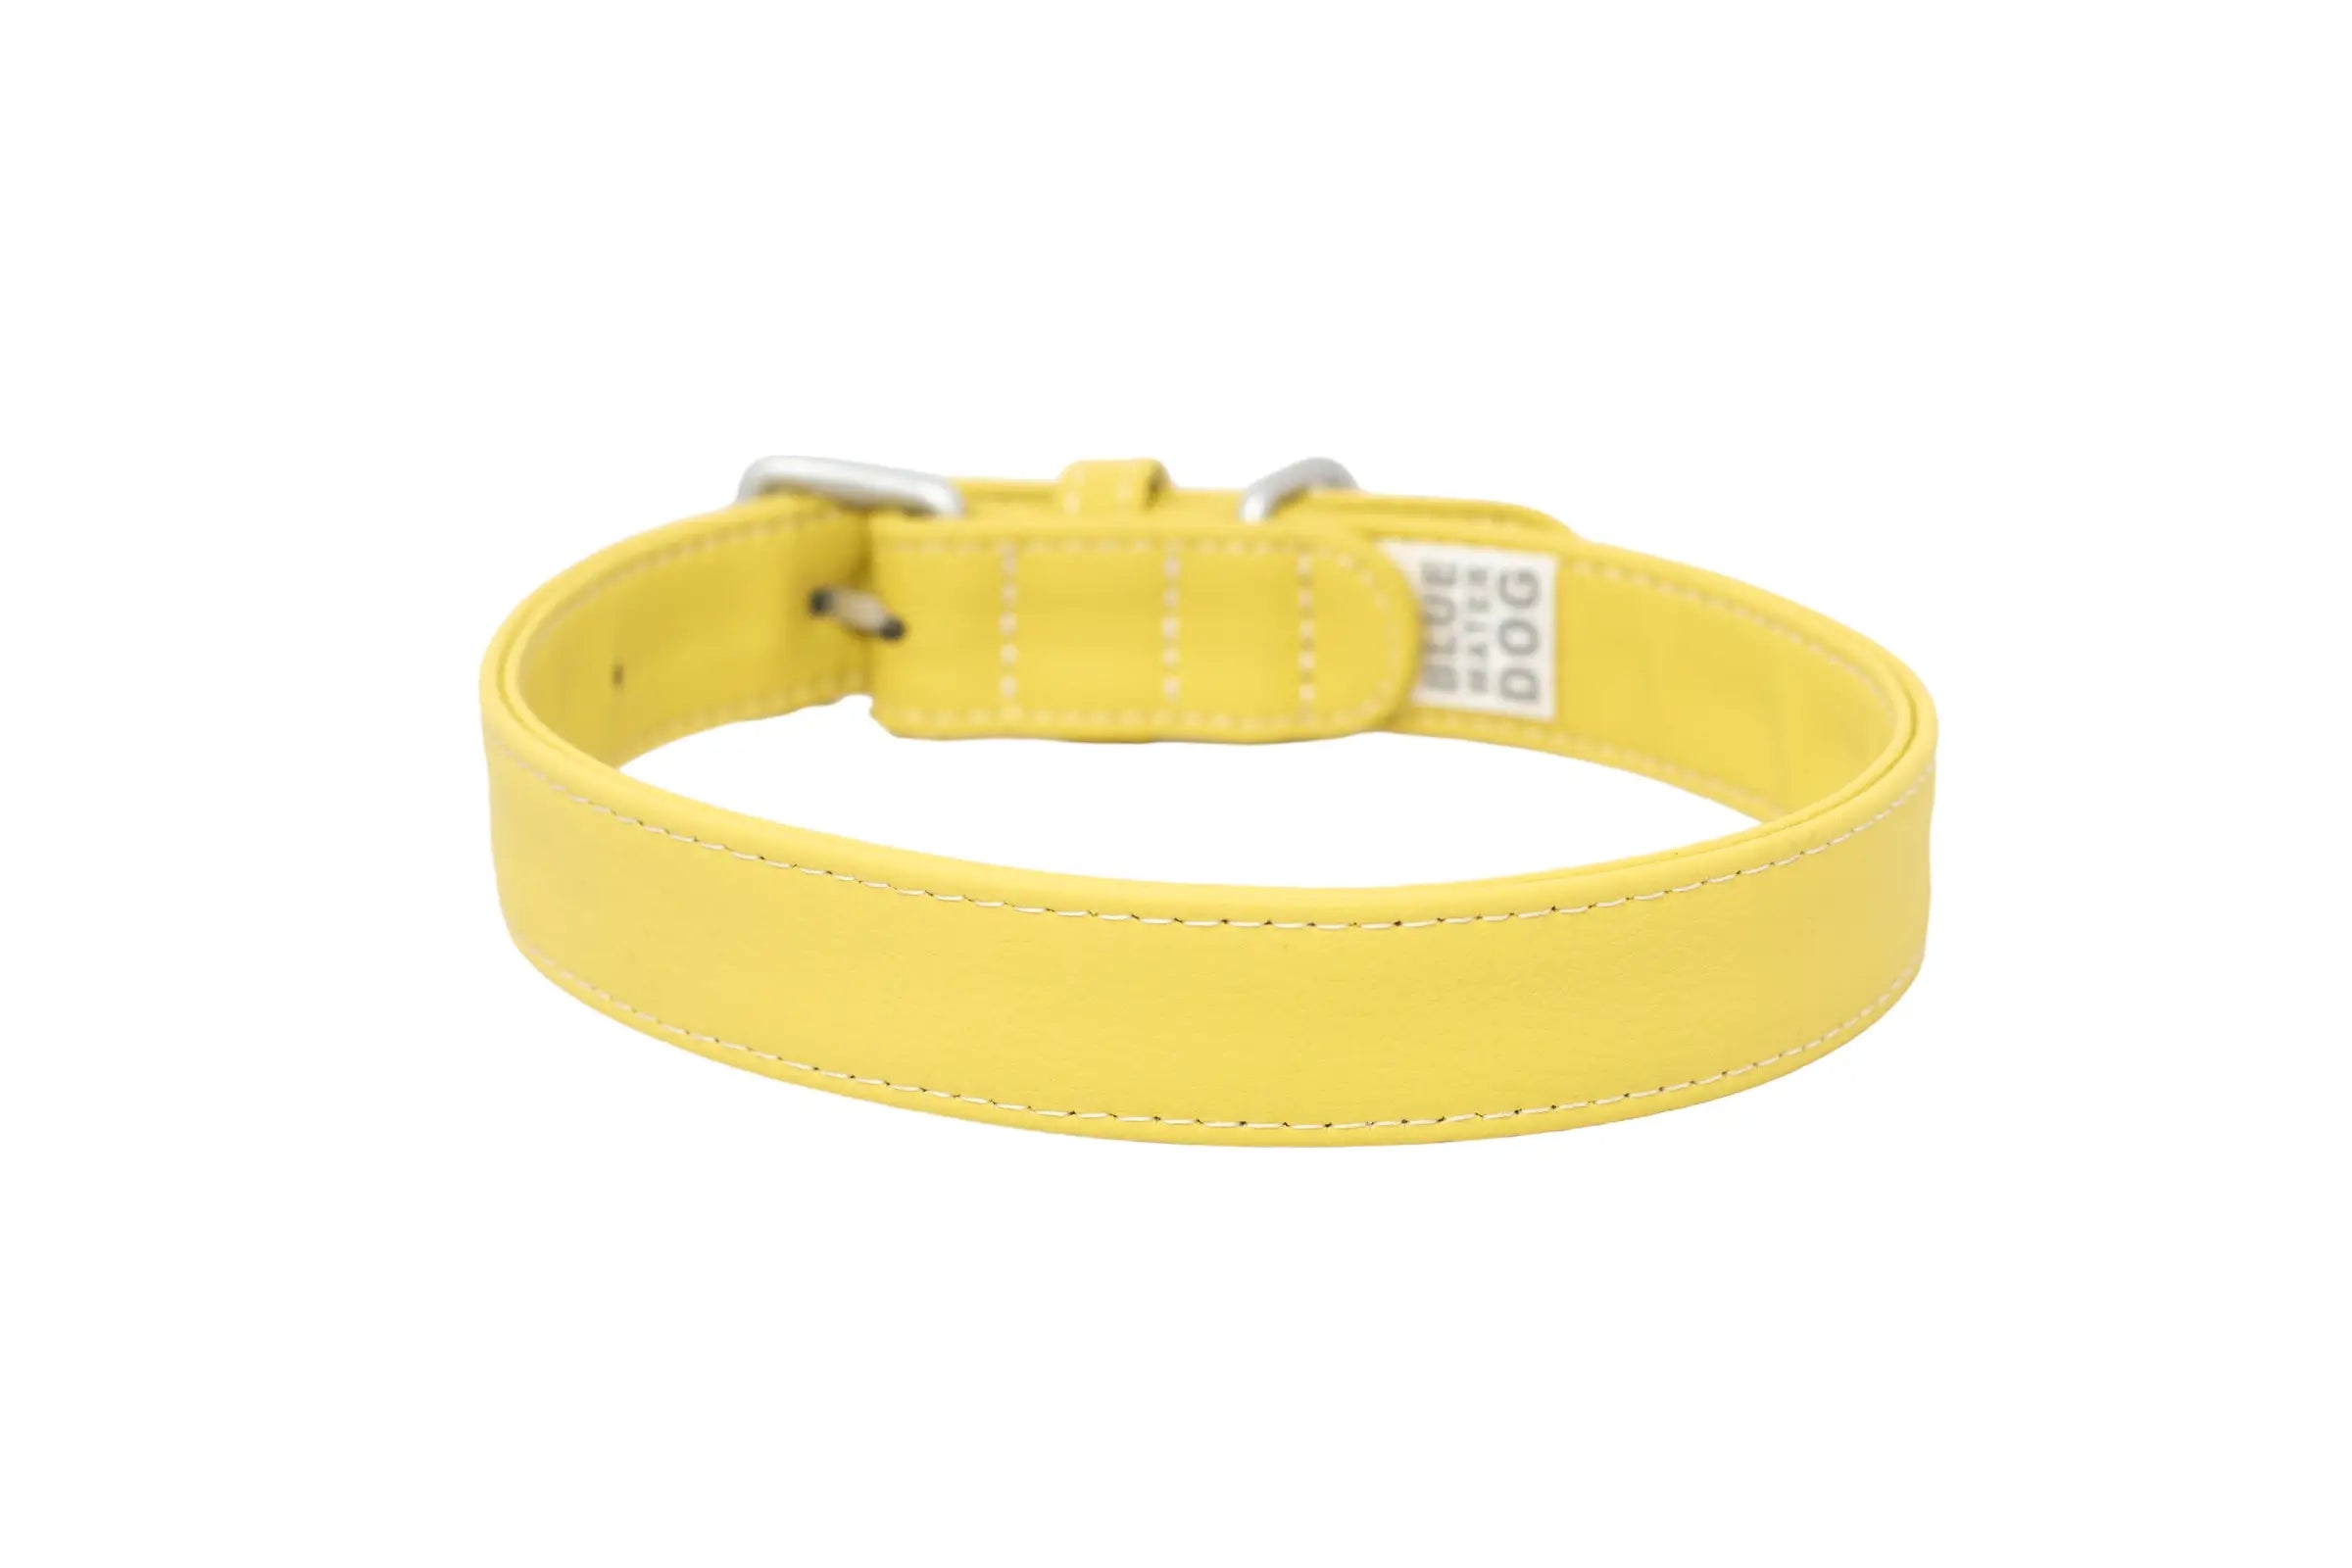 Back of a waterproof and durable dog collar with vegan leather and marine grade anodized aluminum hardware in the color honey yellow.